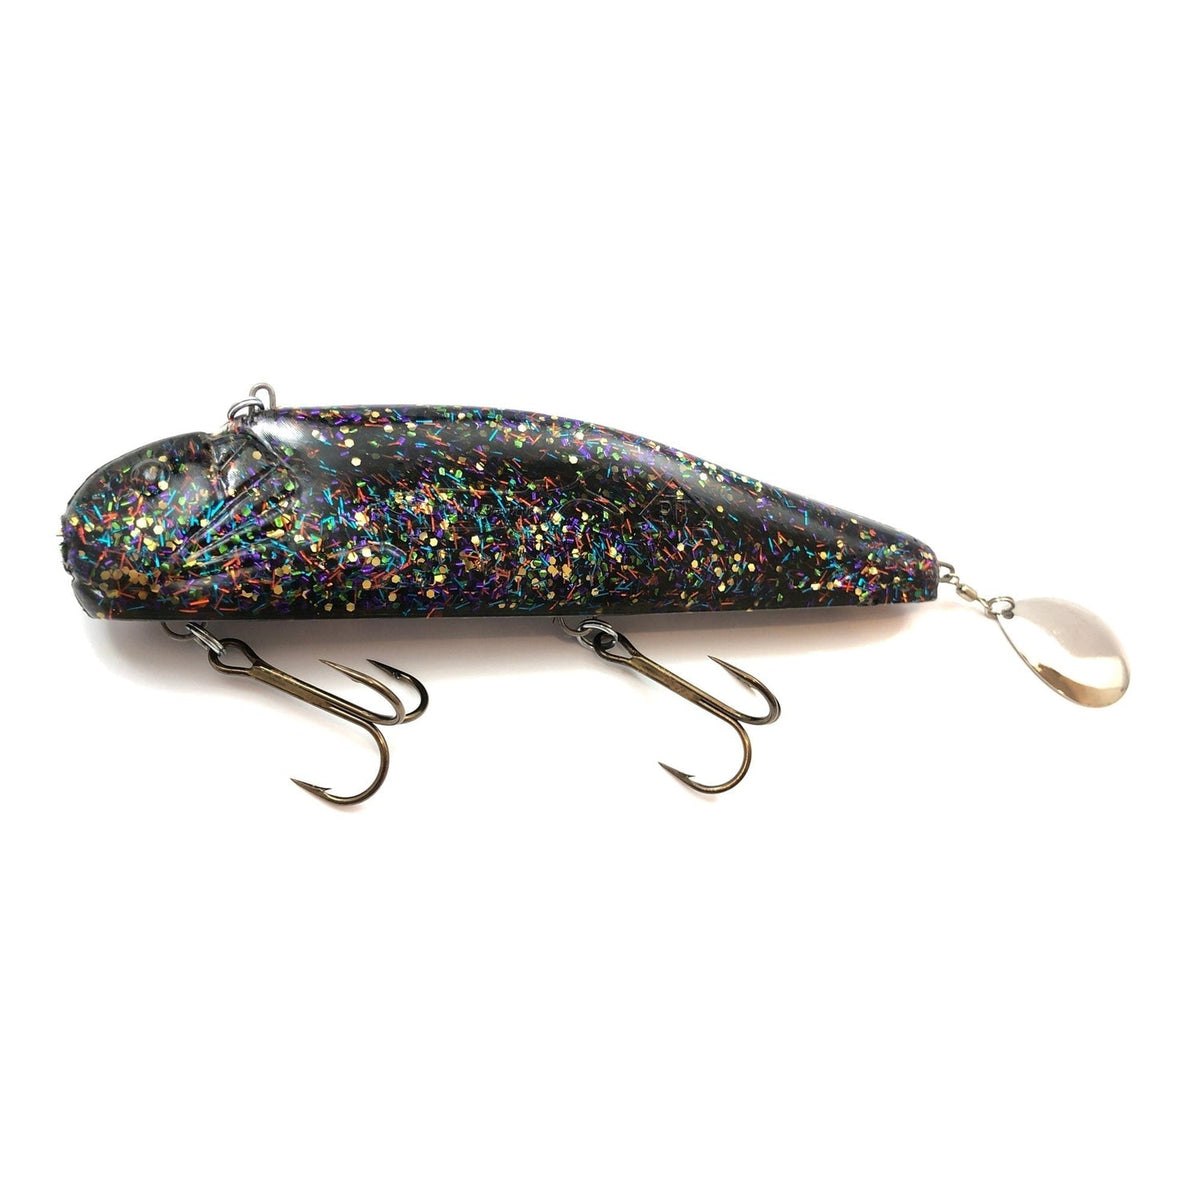 View of Jigs-Spoons Bondy Bait Co. Bondy Bait Original Jig Bluegill available at EZOKO Pike and Musky Shop